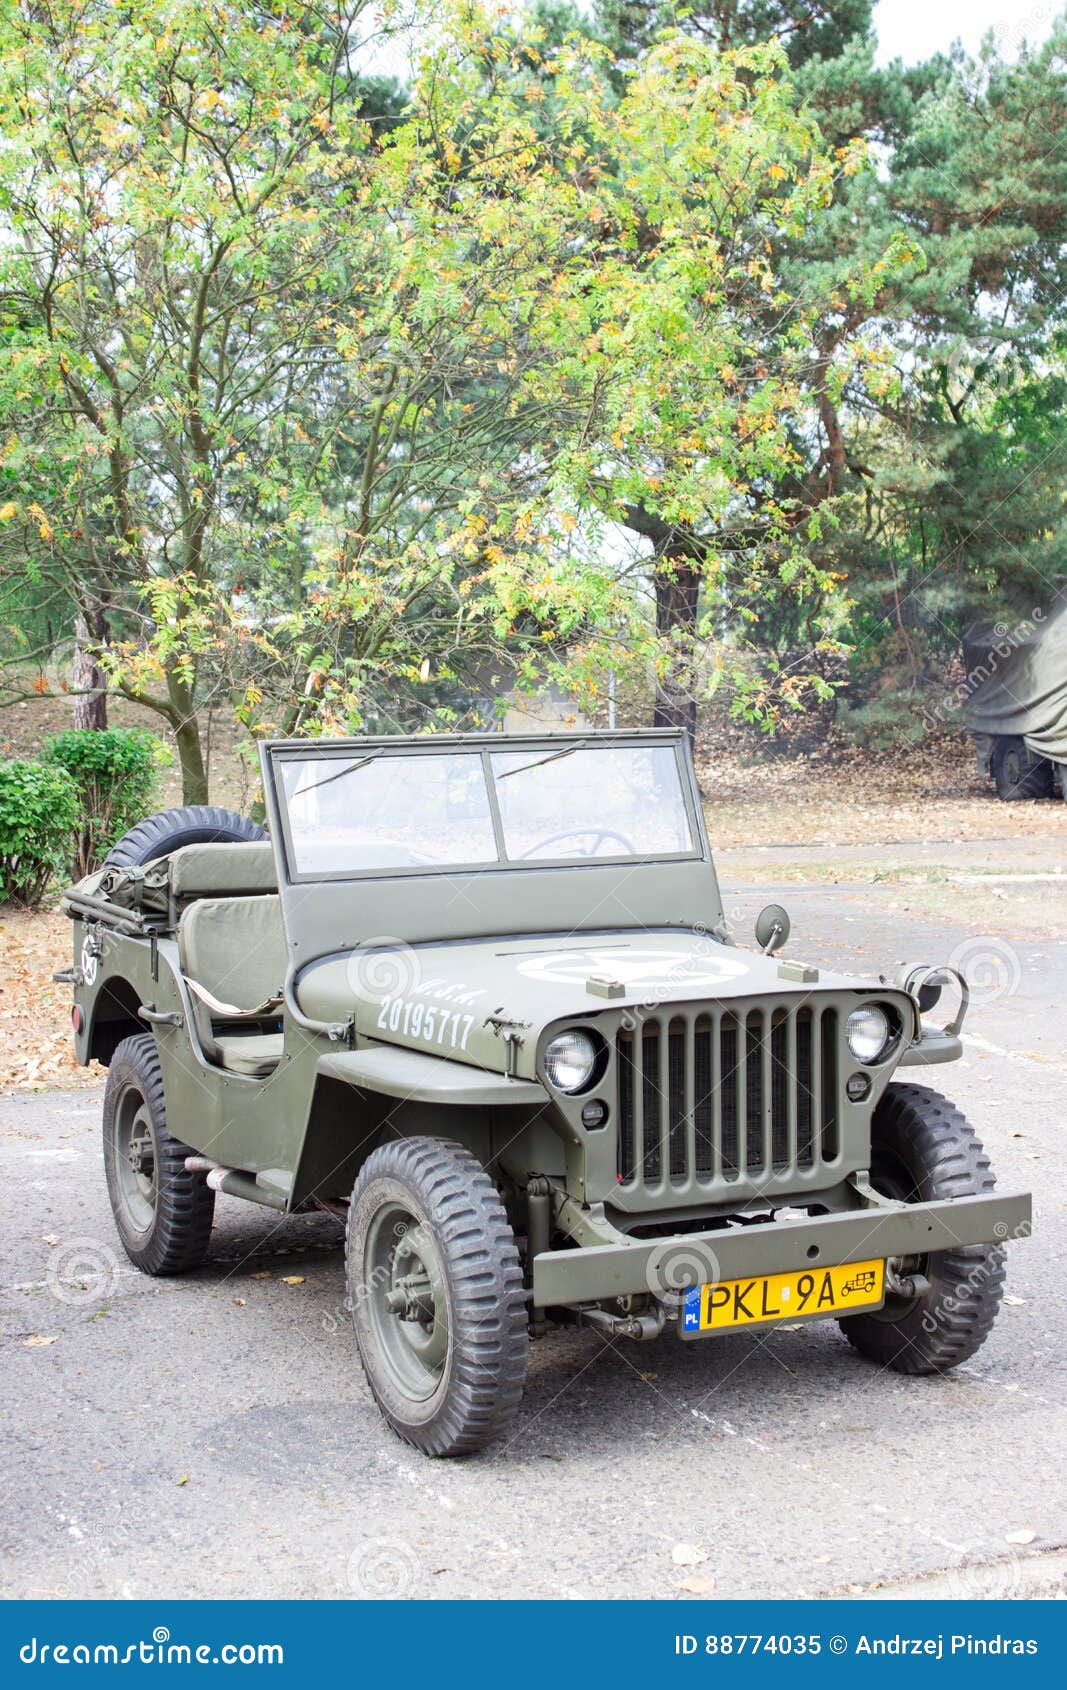 Poland, Poznan October 1, 2016. American Military Jeep